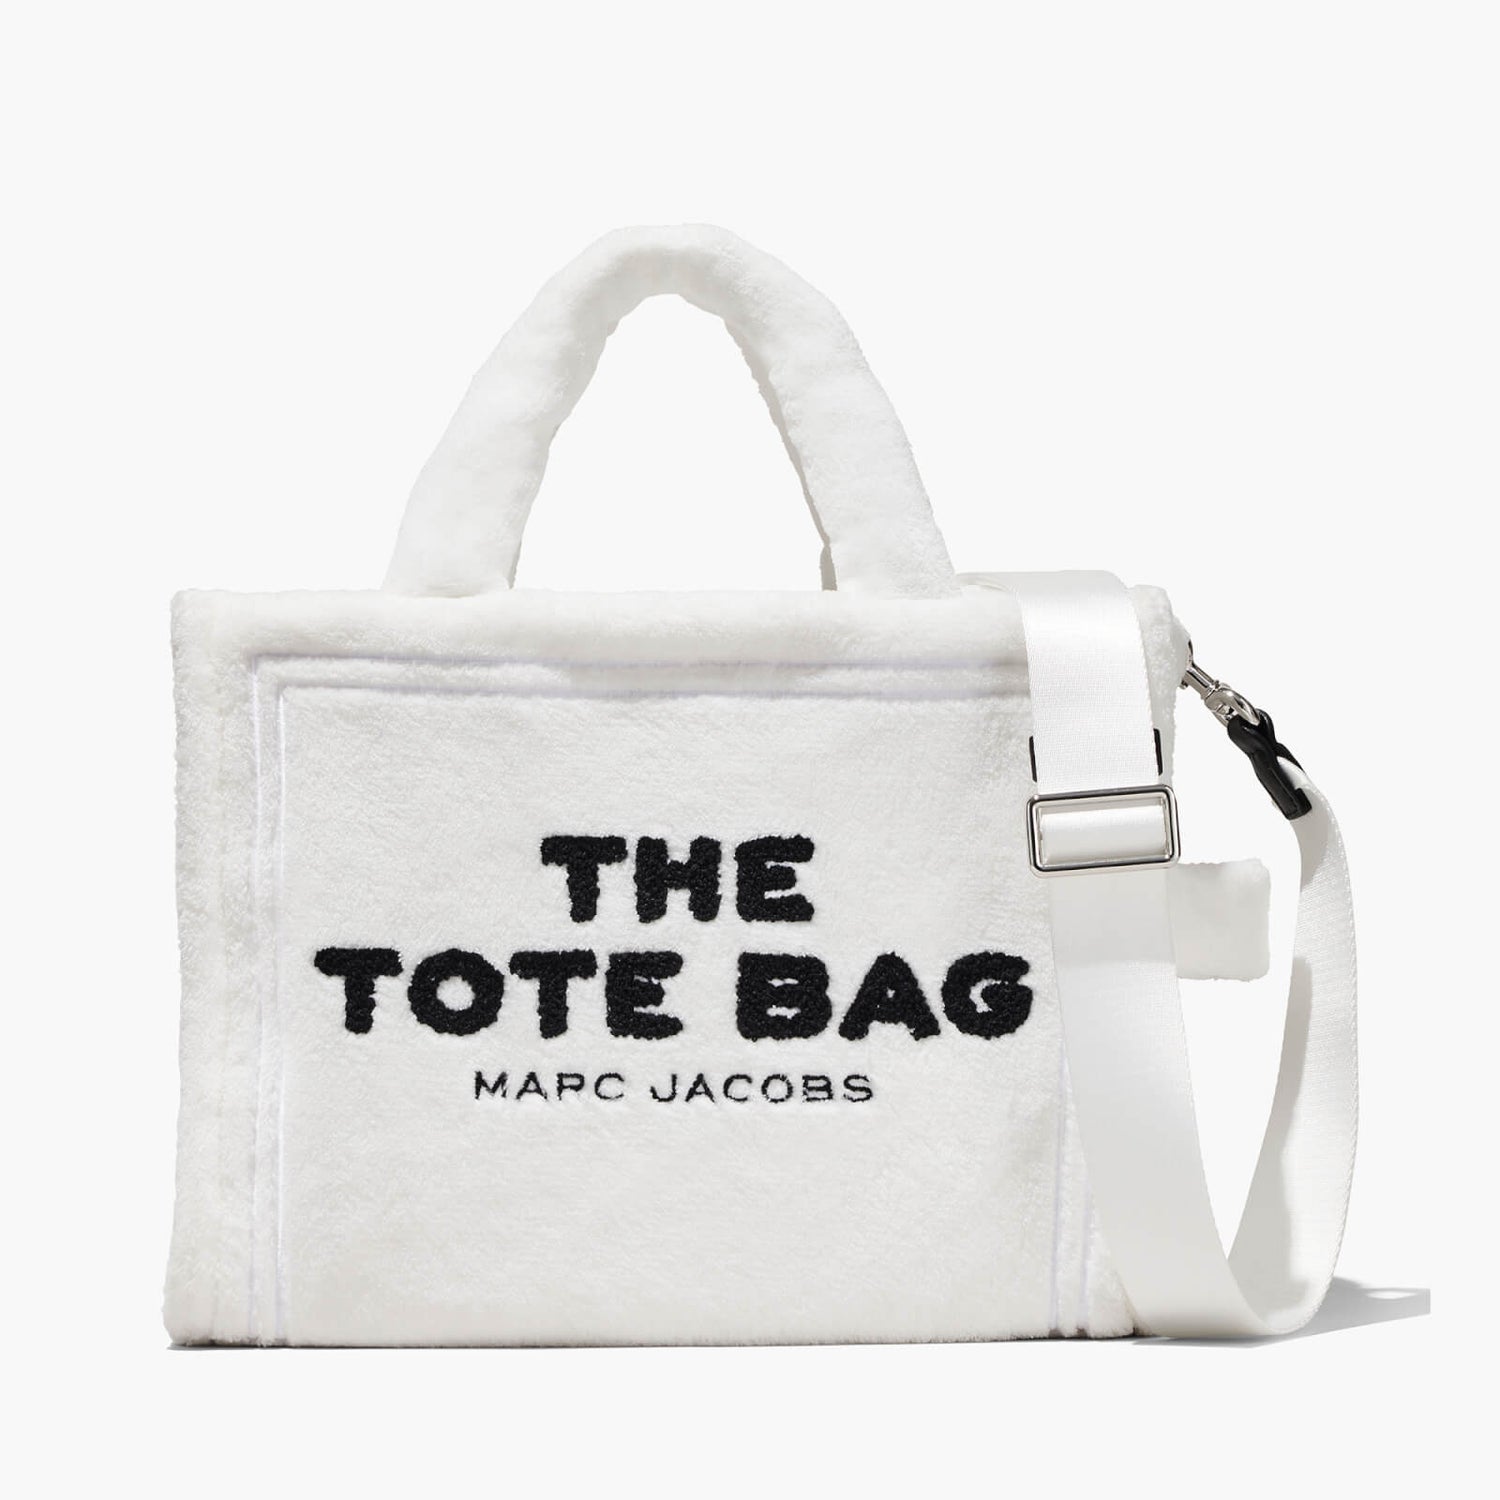 Marc Jacobs Women's The Small Tote Bag Terry - White